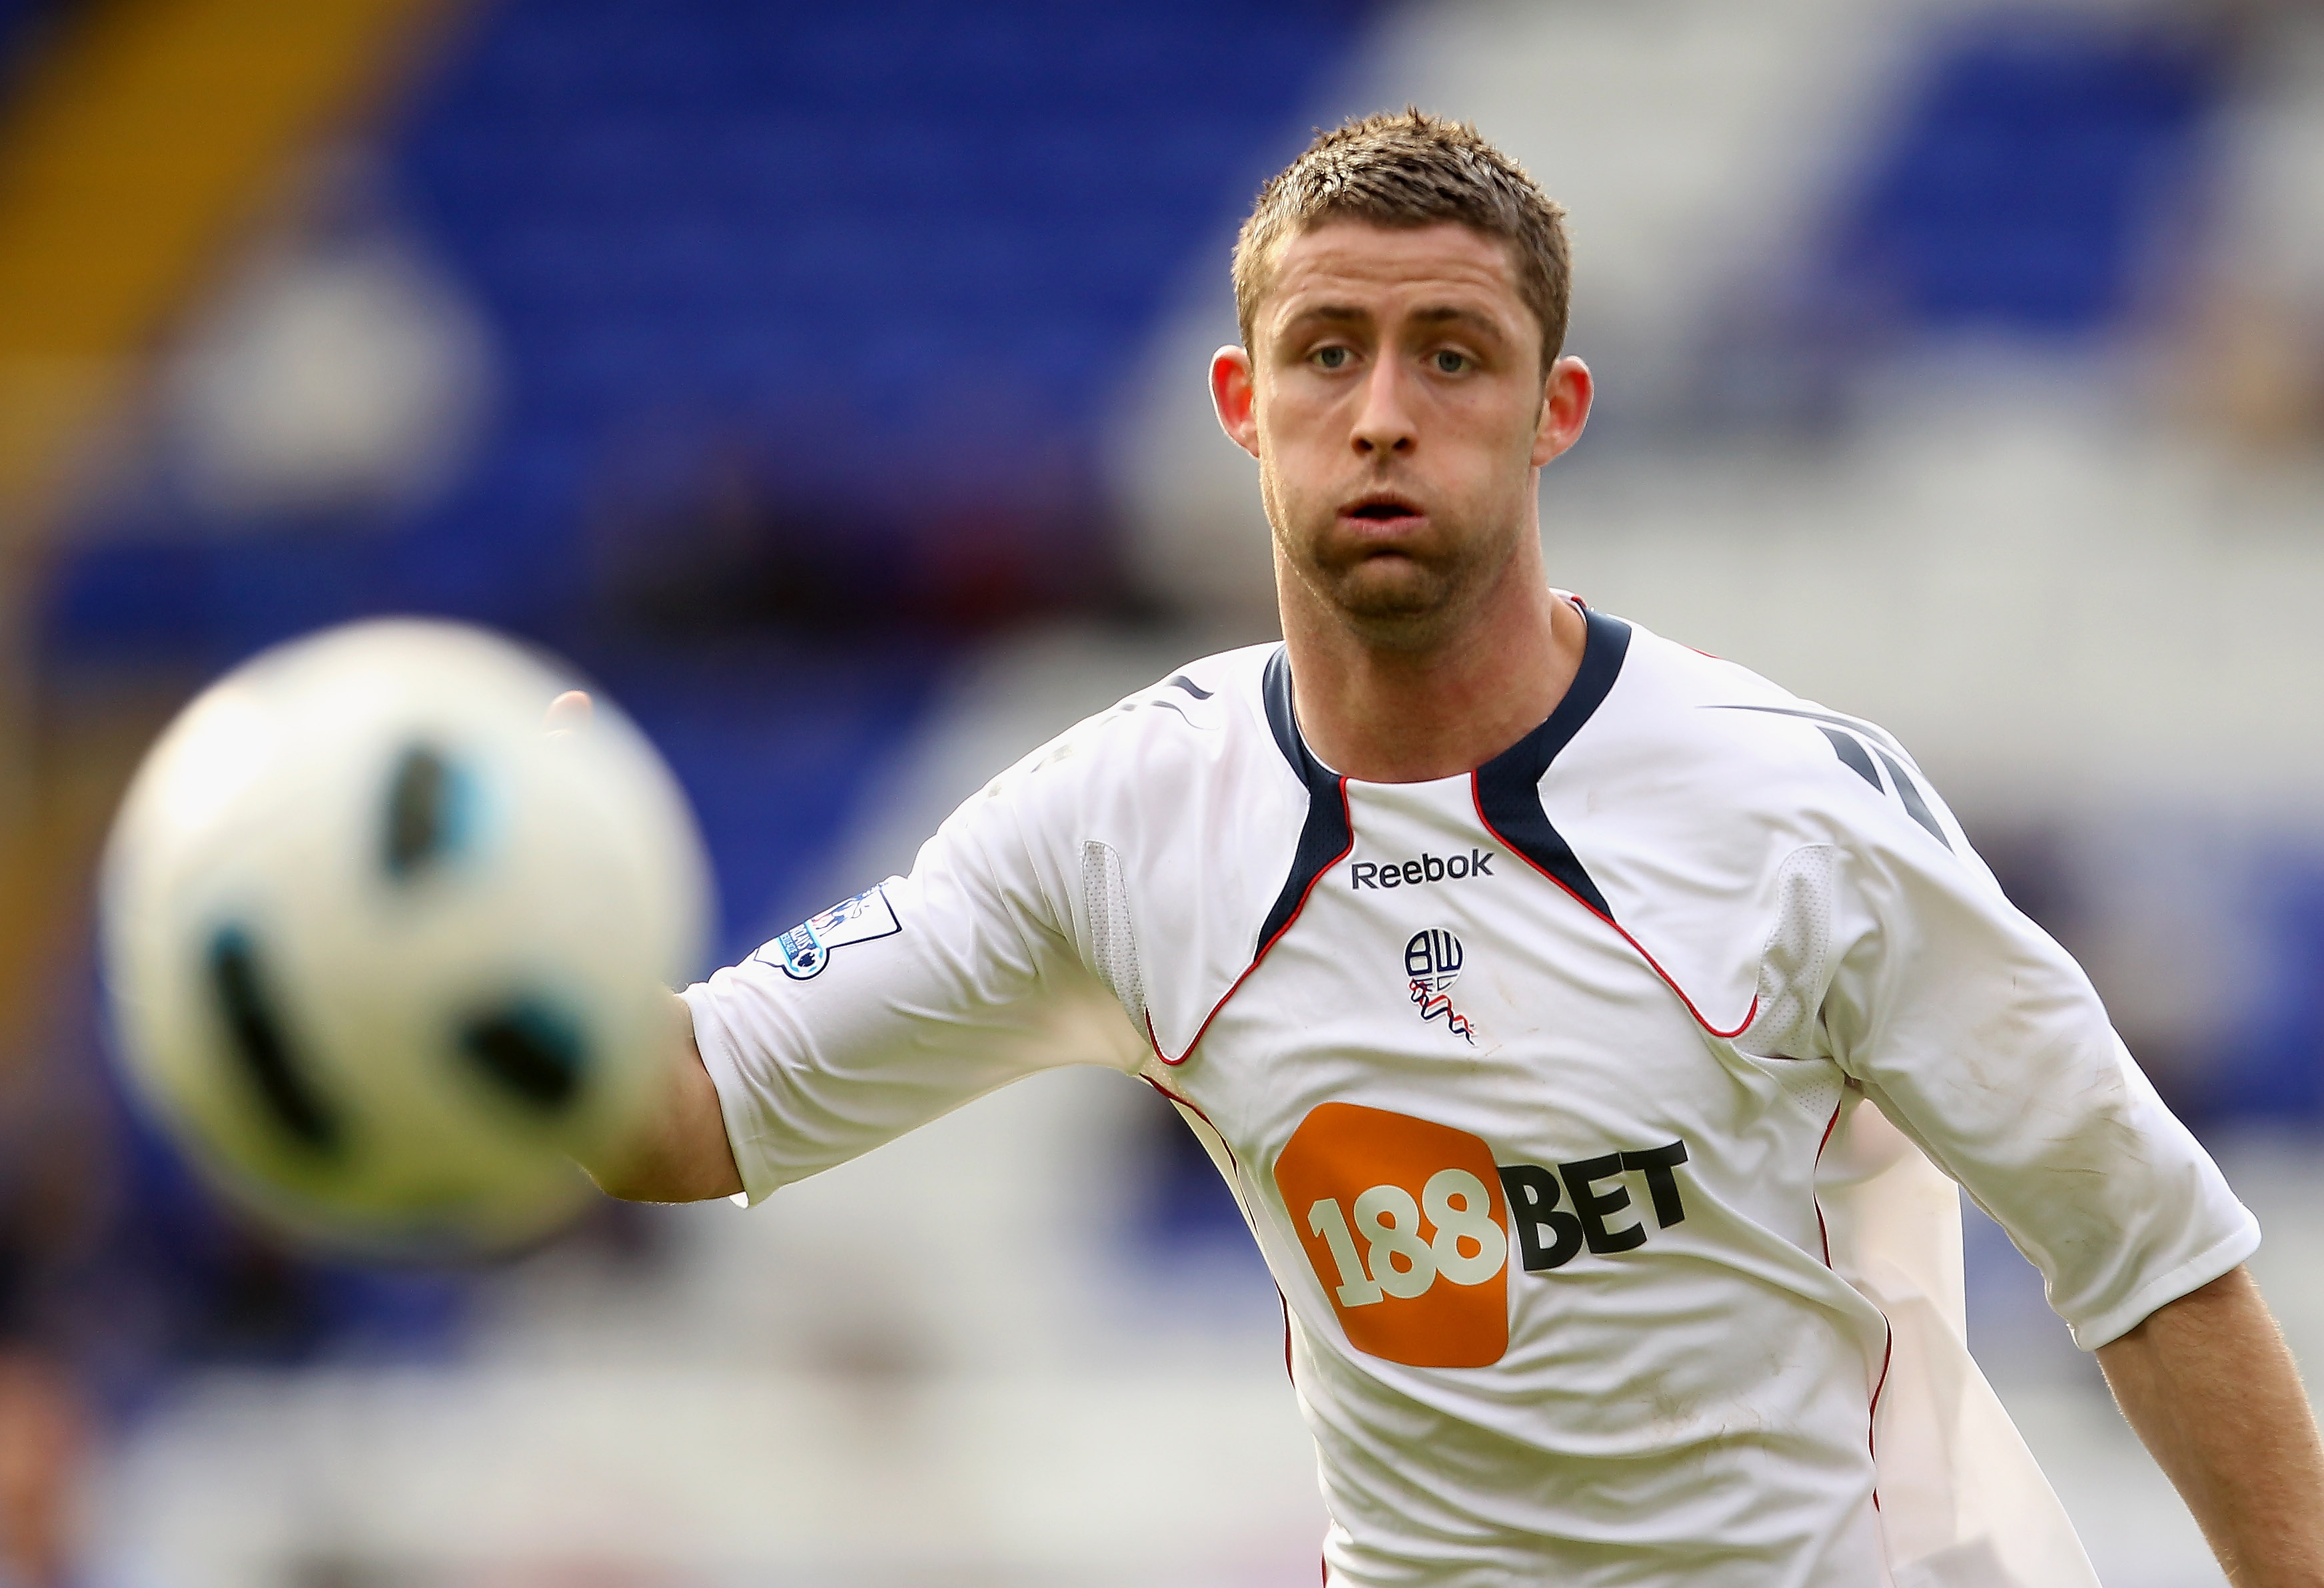 BIRMINGHAM, ENGLAND - APRIL 02:  Gary Cahill of Bolton in action during the Barclays Premier League match between Birmingham City  and Bolton Wanderers on April 2, 2011 in Birmingham, England.  (Photo by Scott Heavey/Getty Images)